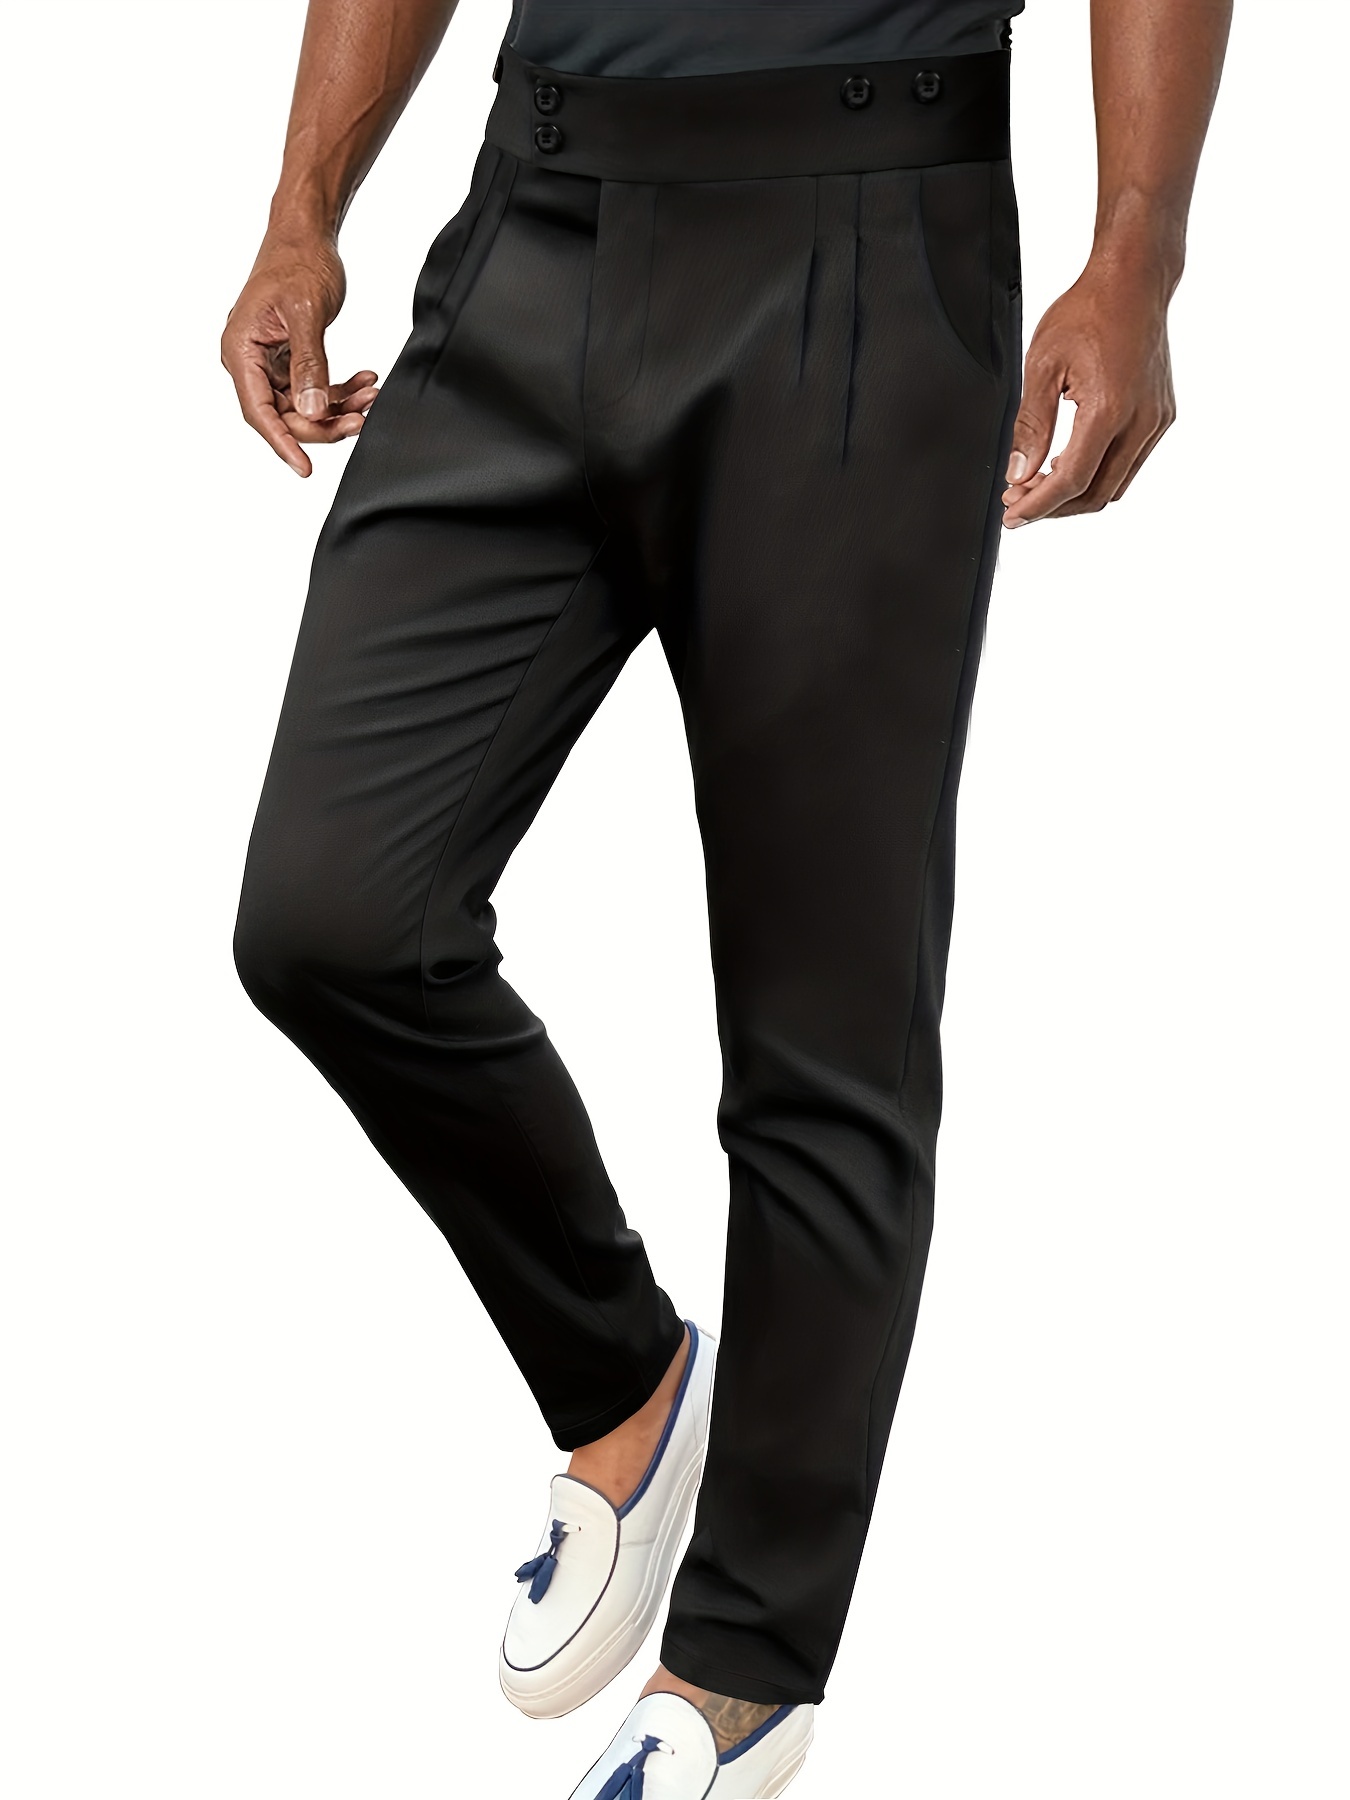 Black Slim Fit Plaid Pants for Men by GentWith | Worldwide Shipping